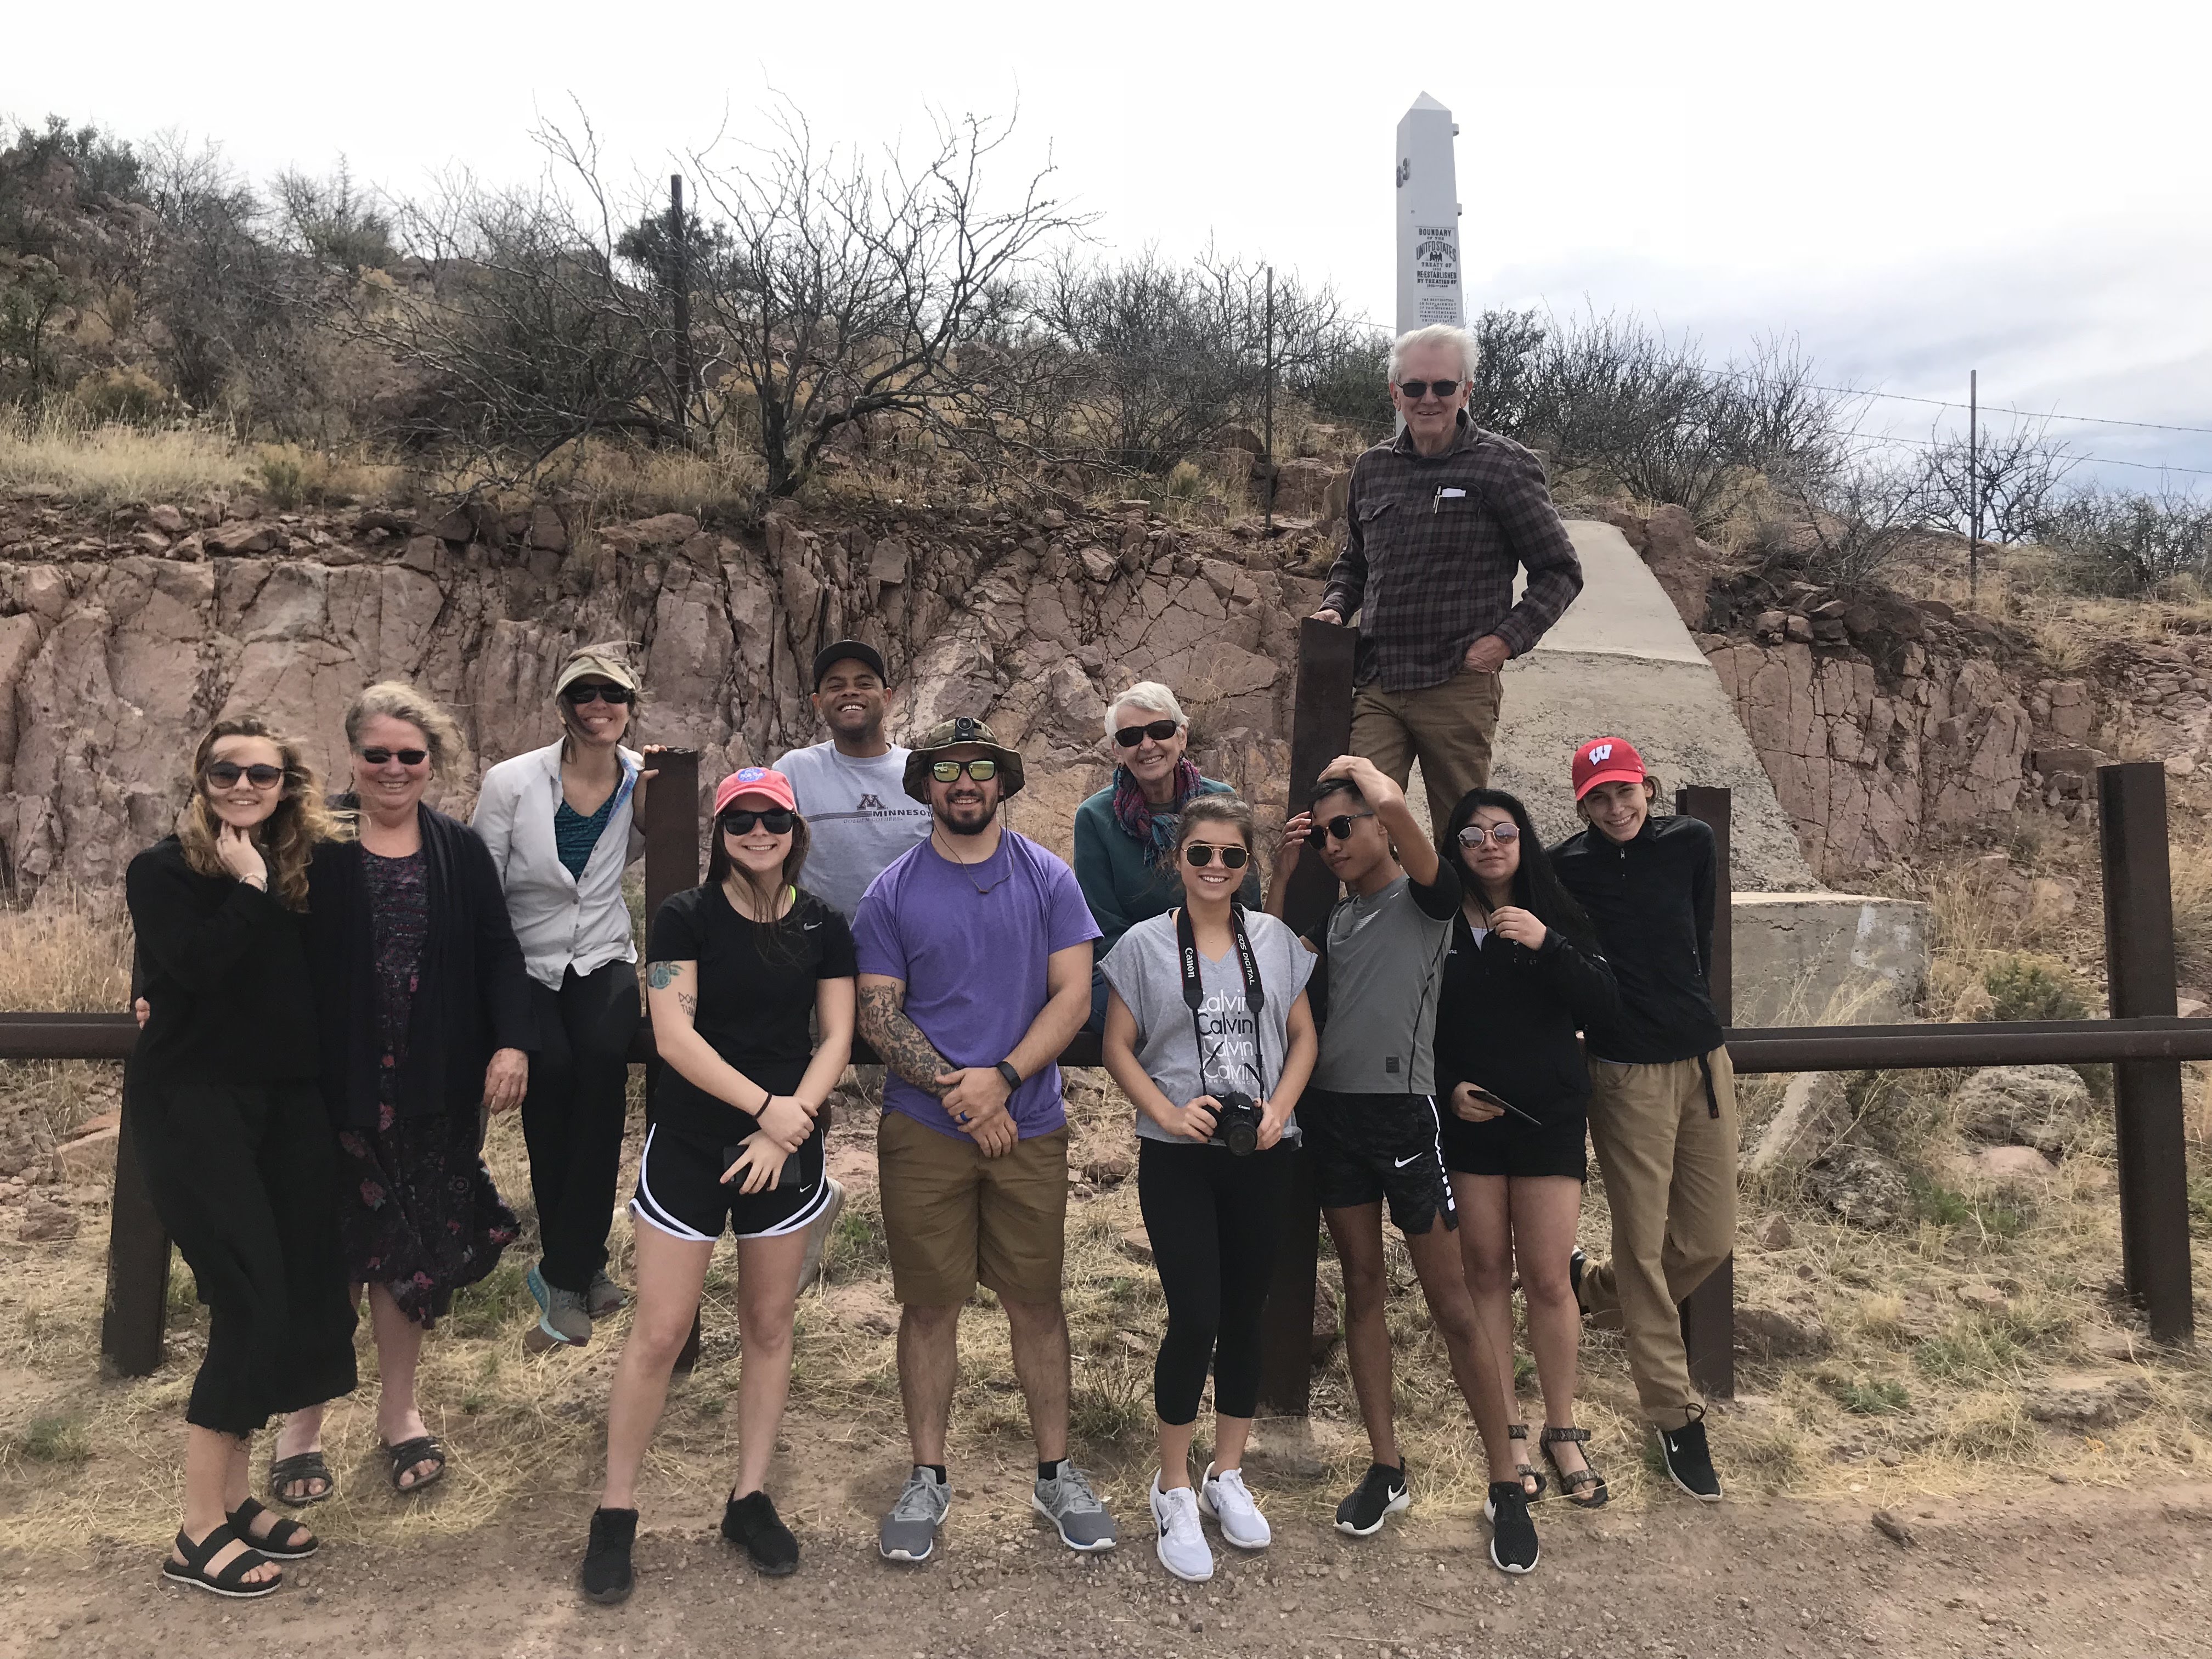 Bridging Borders Class in Mexico, Spring 2018